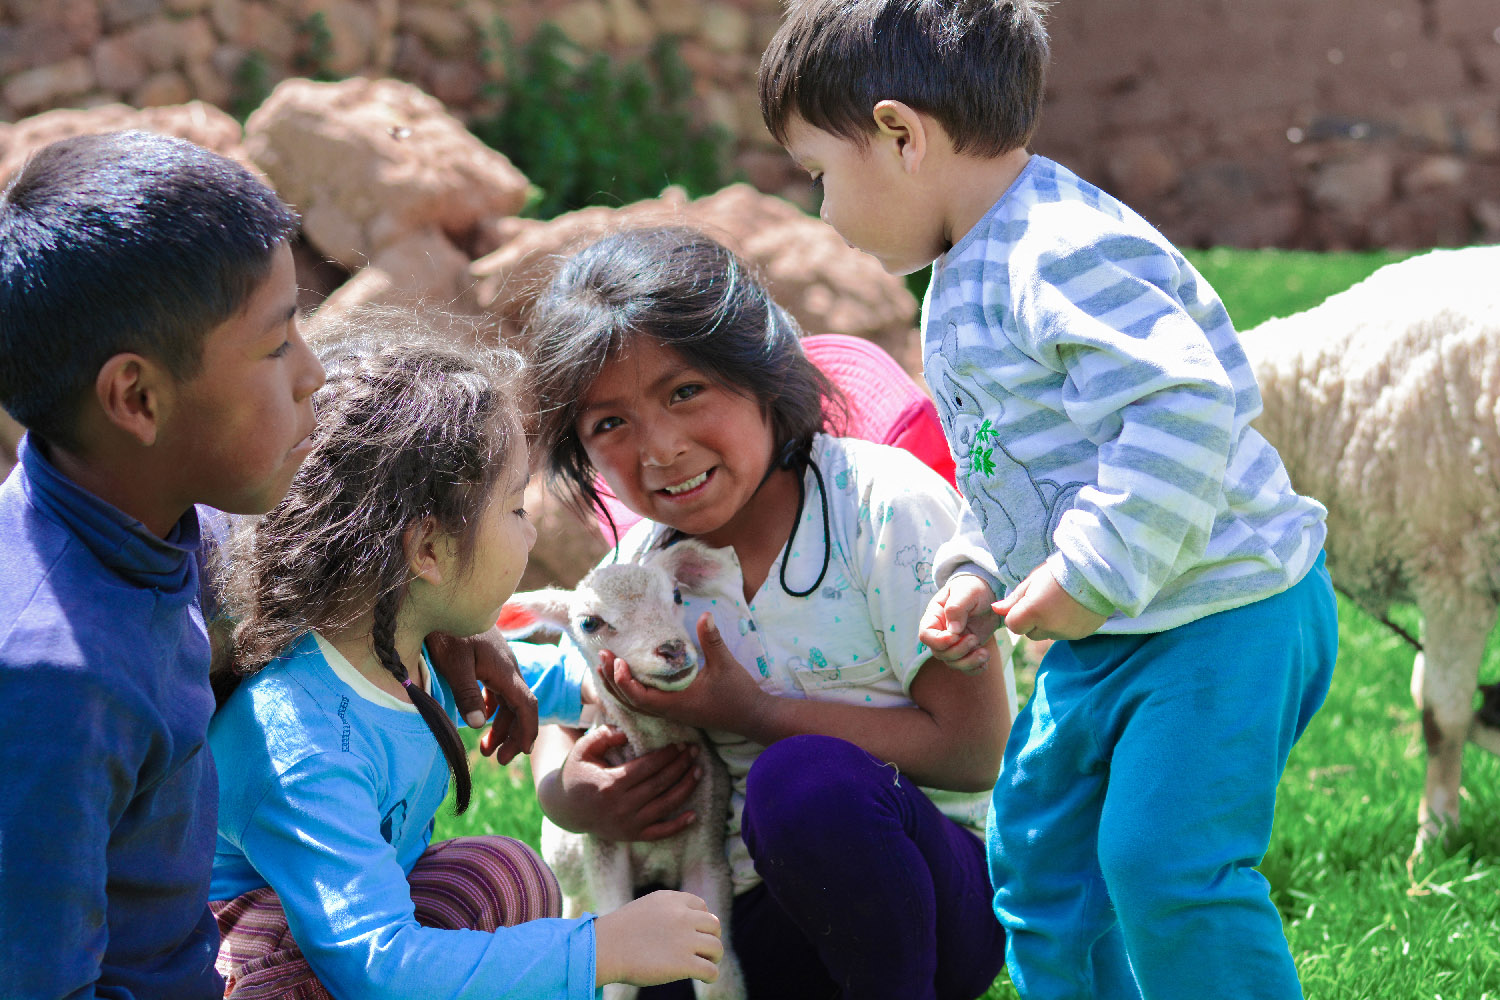 Children hold a young lamb in a grassy field.